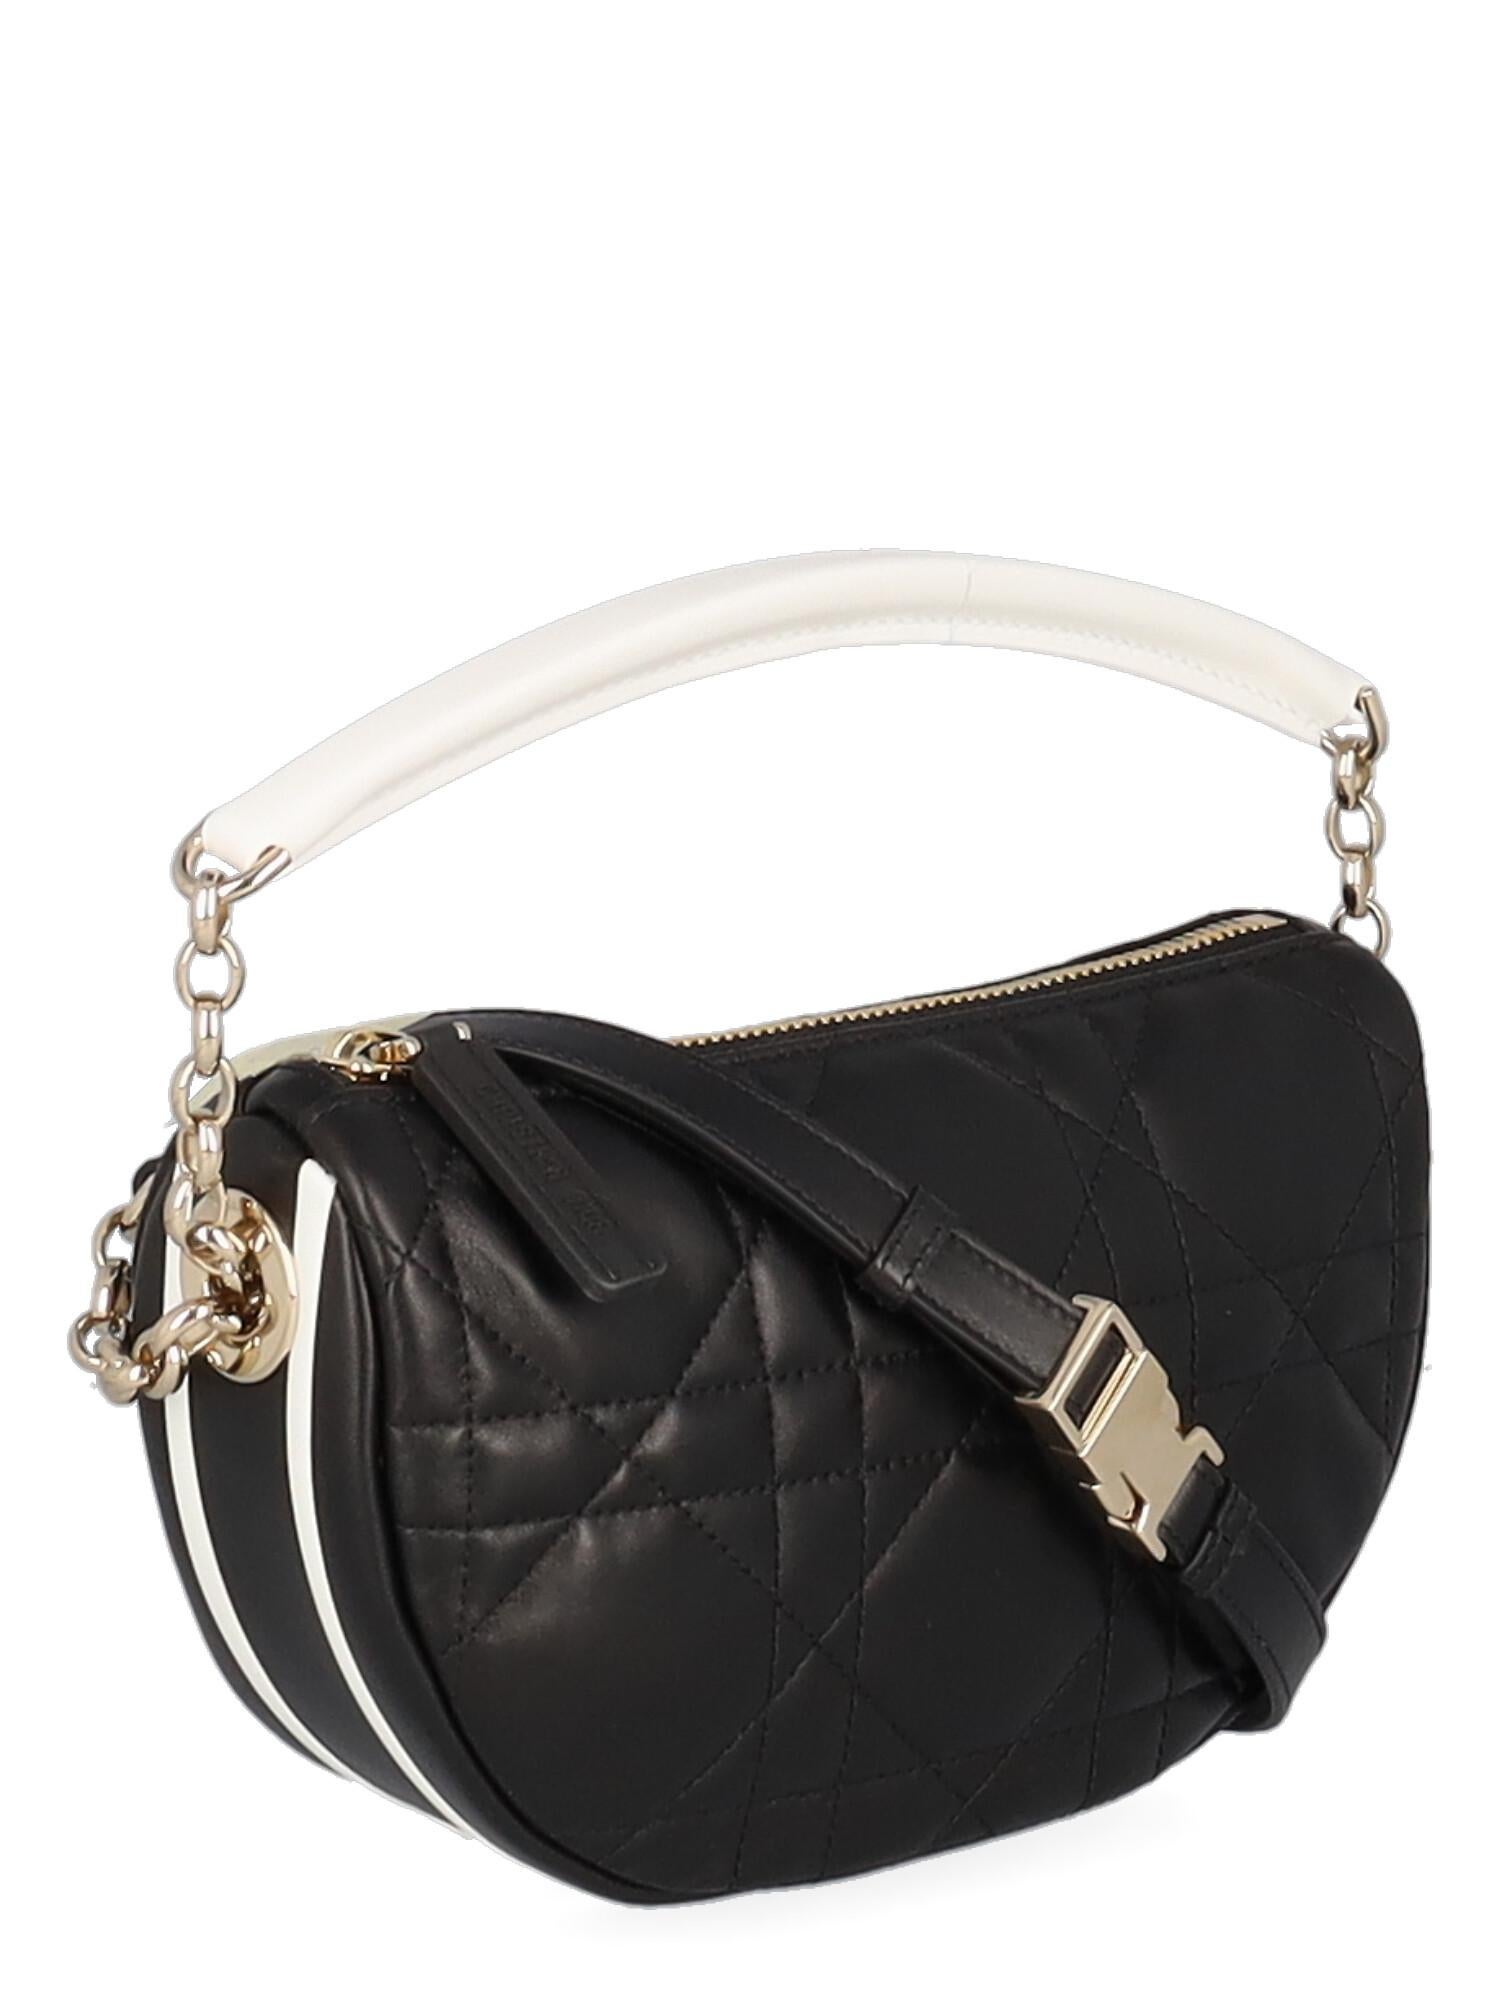 Dior Women Shoulder bags Black Leather  In Excellent Condition For Sale In Milan, IT